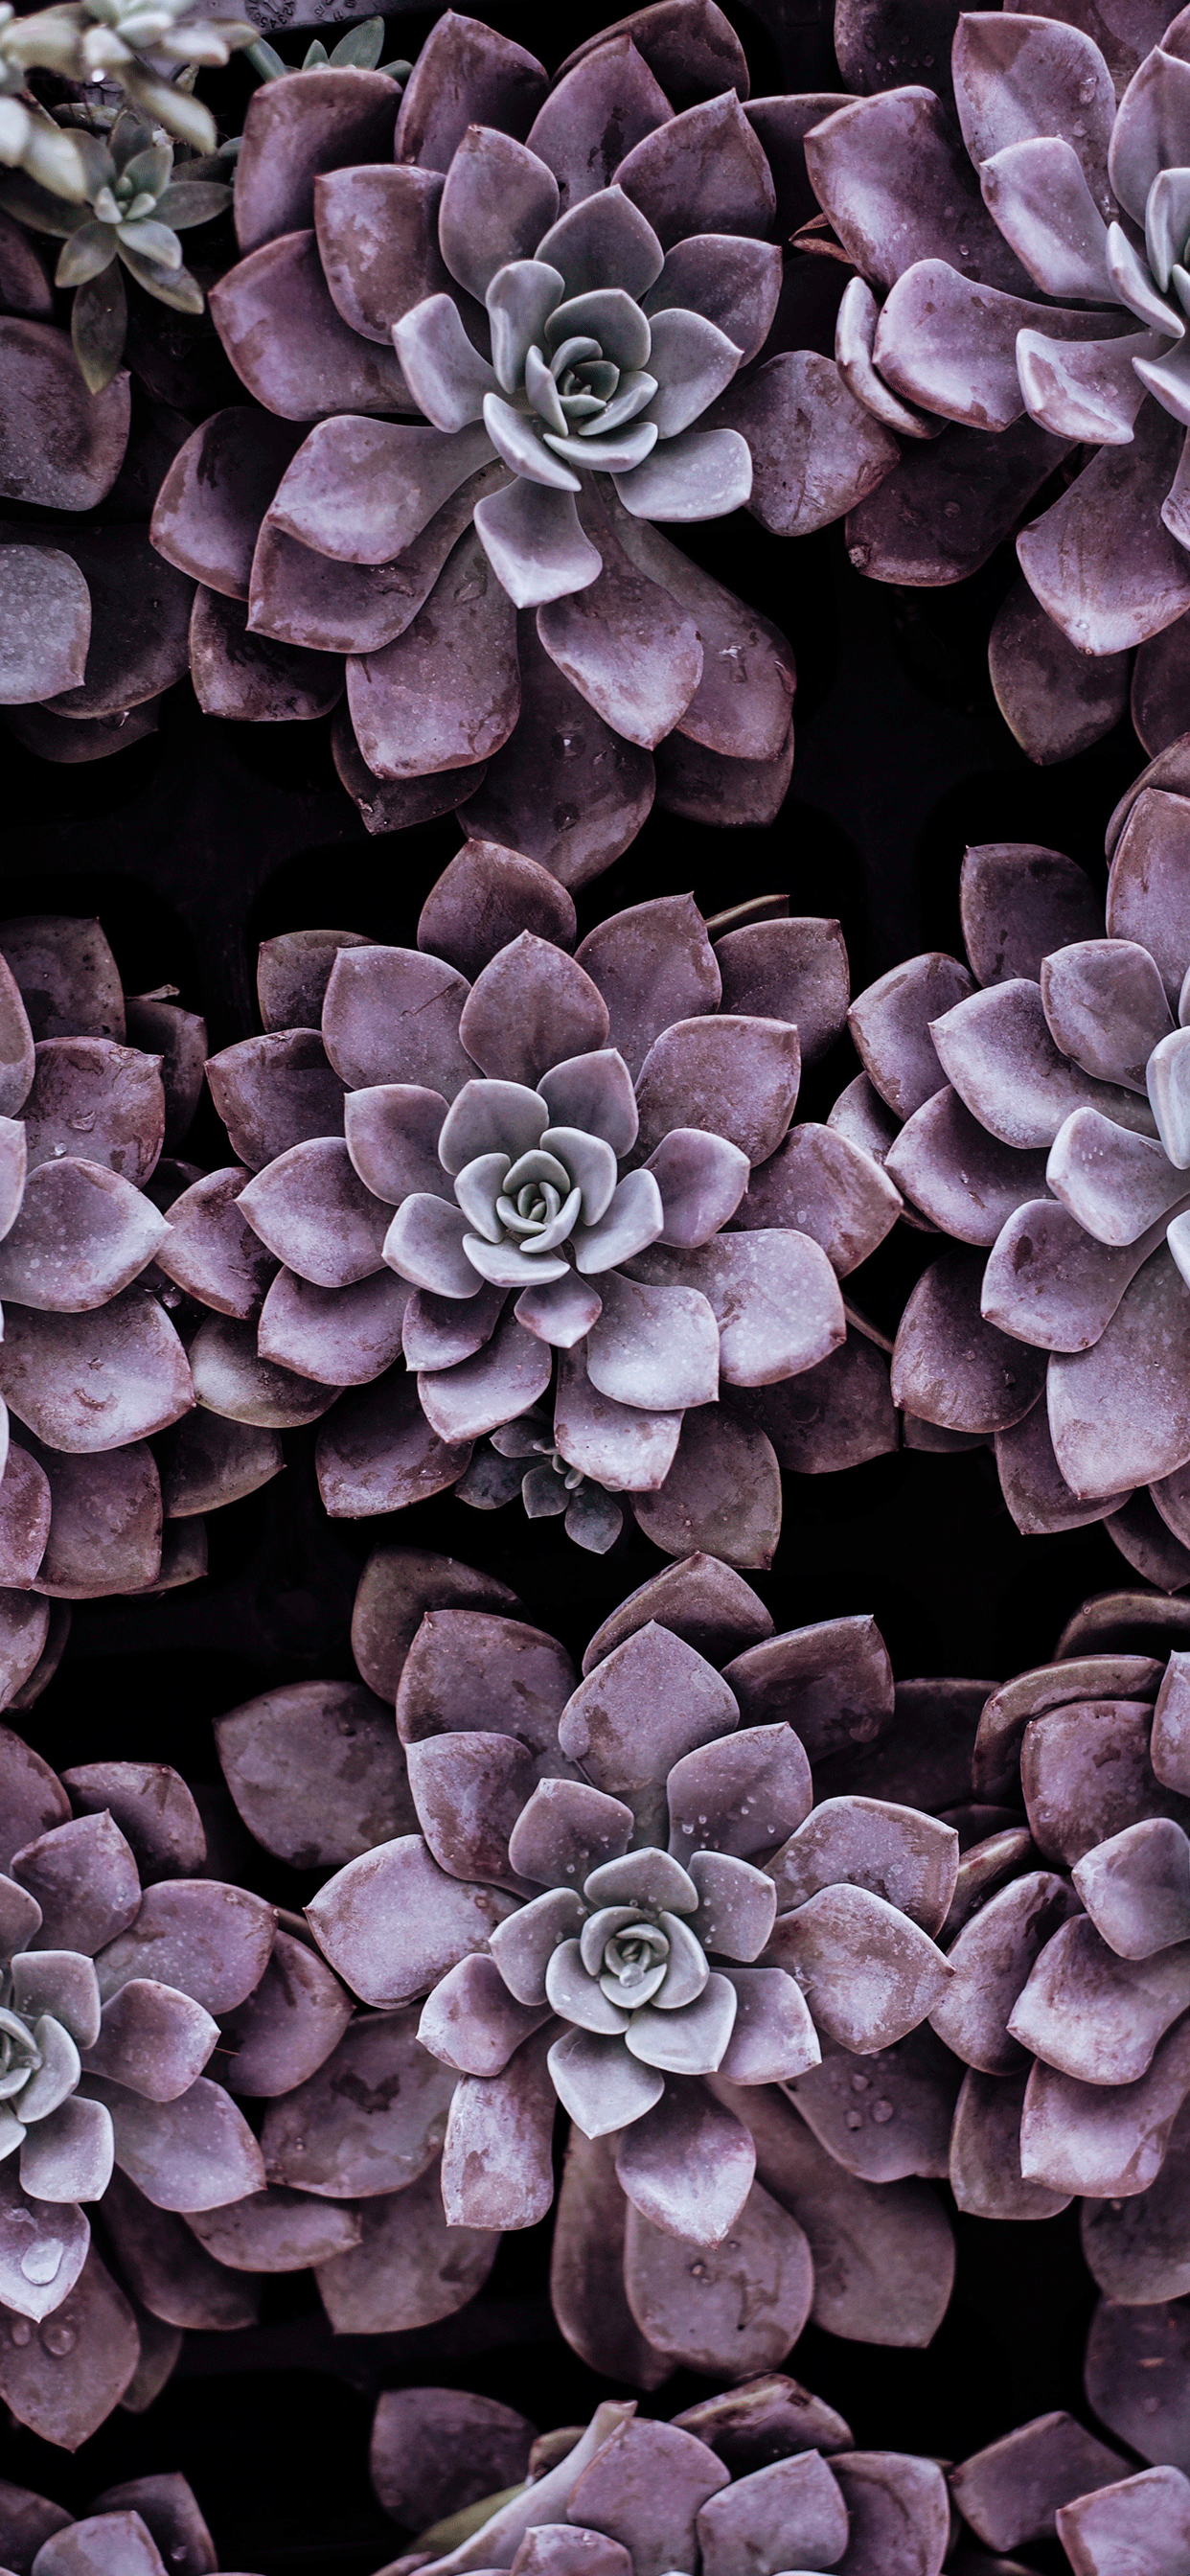 Succulent plant Wallpaper for iPhone X, 6